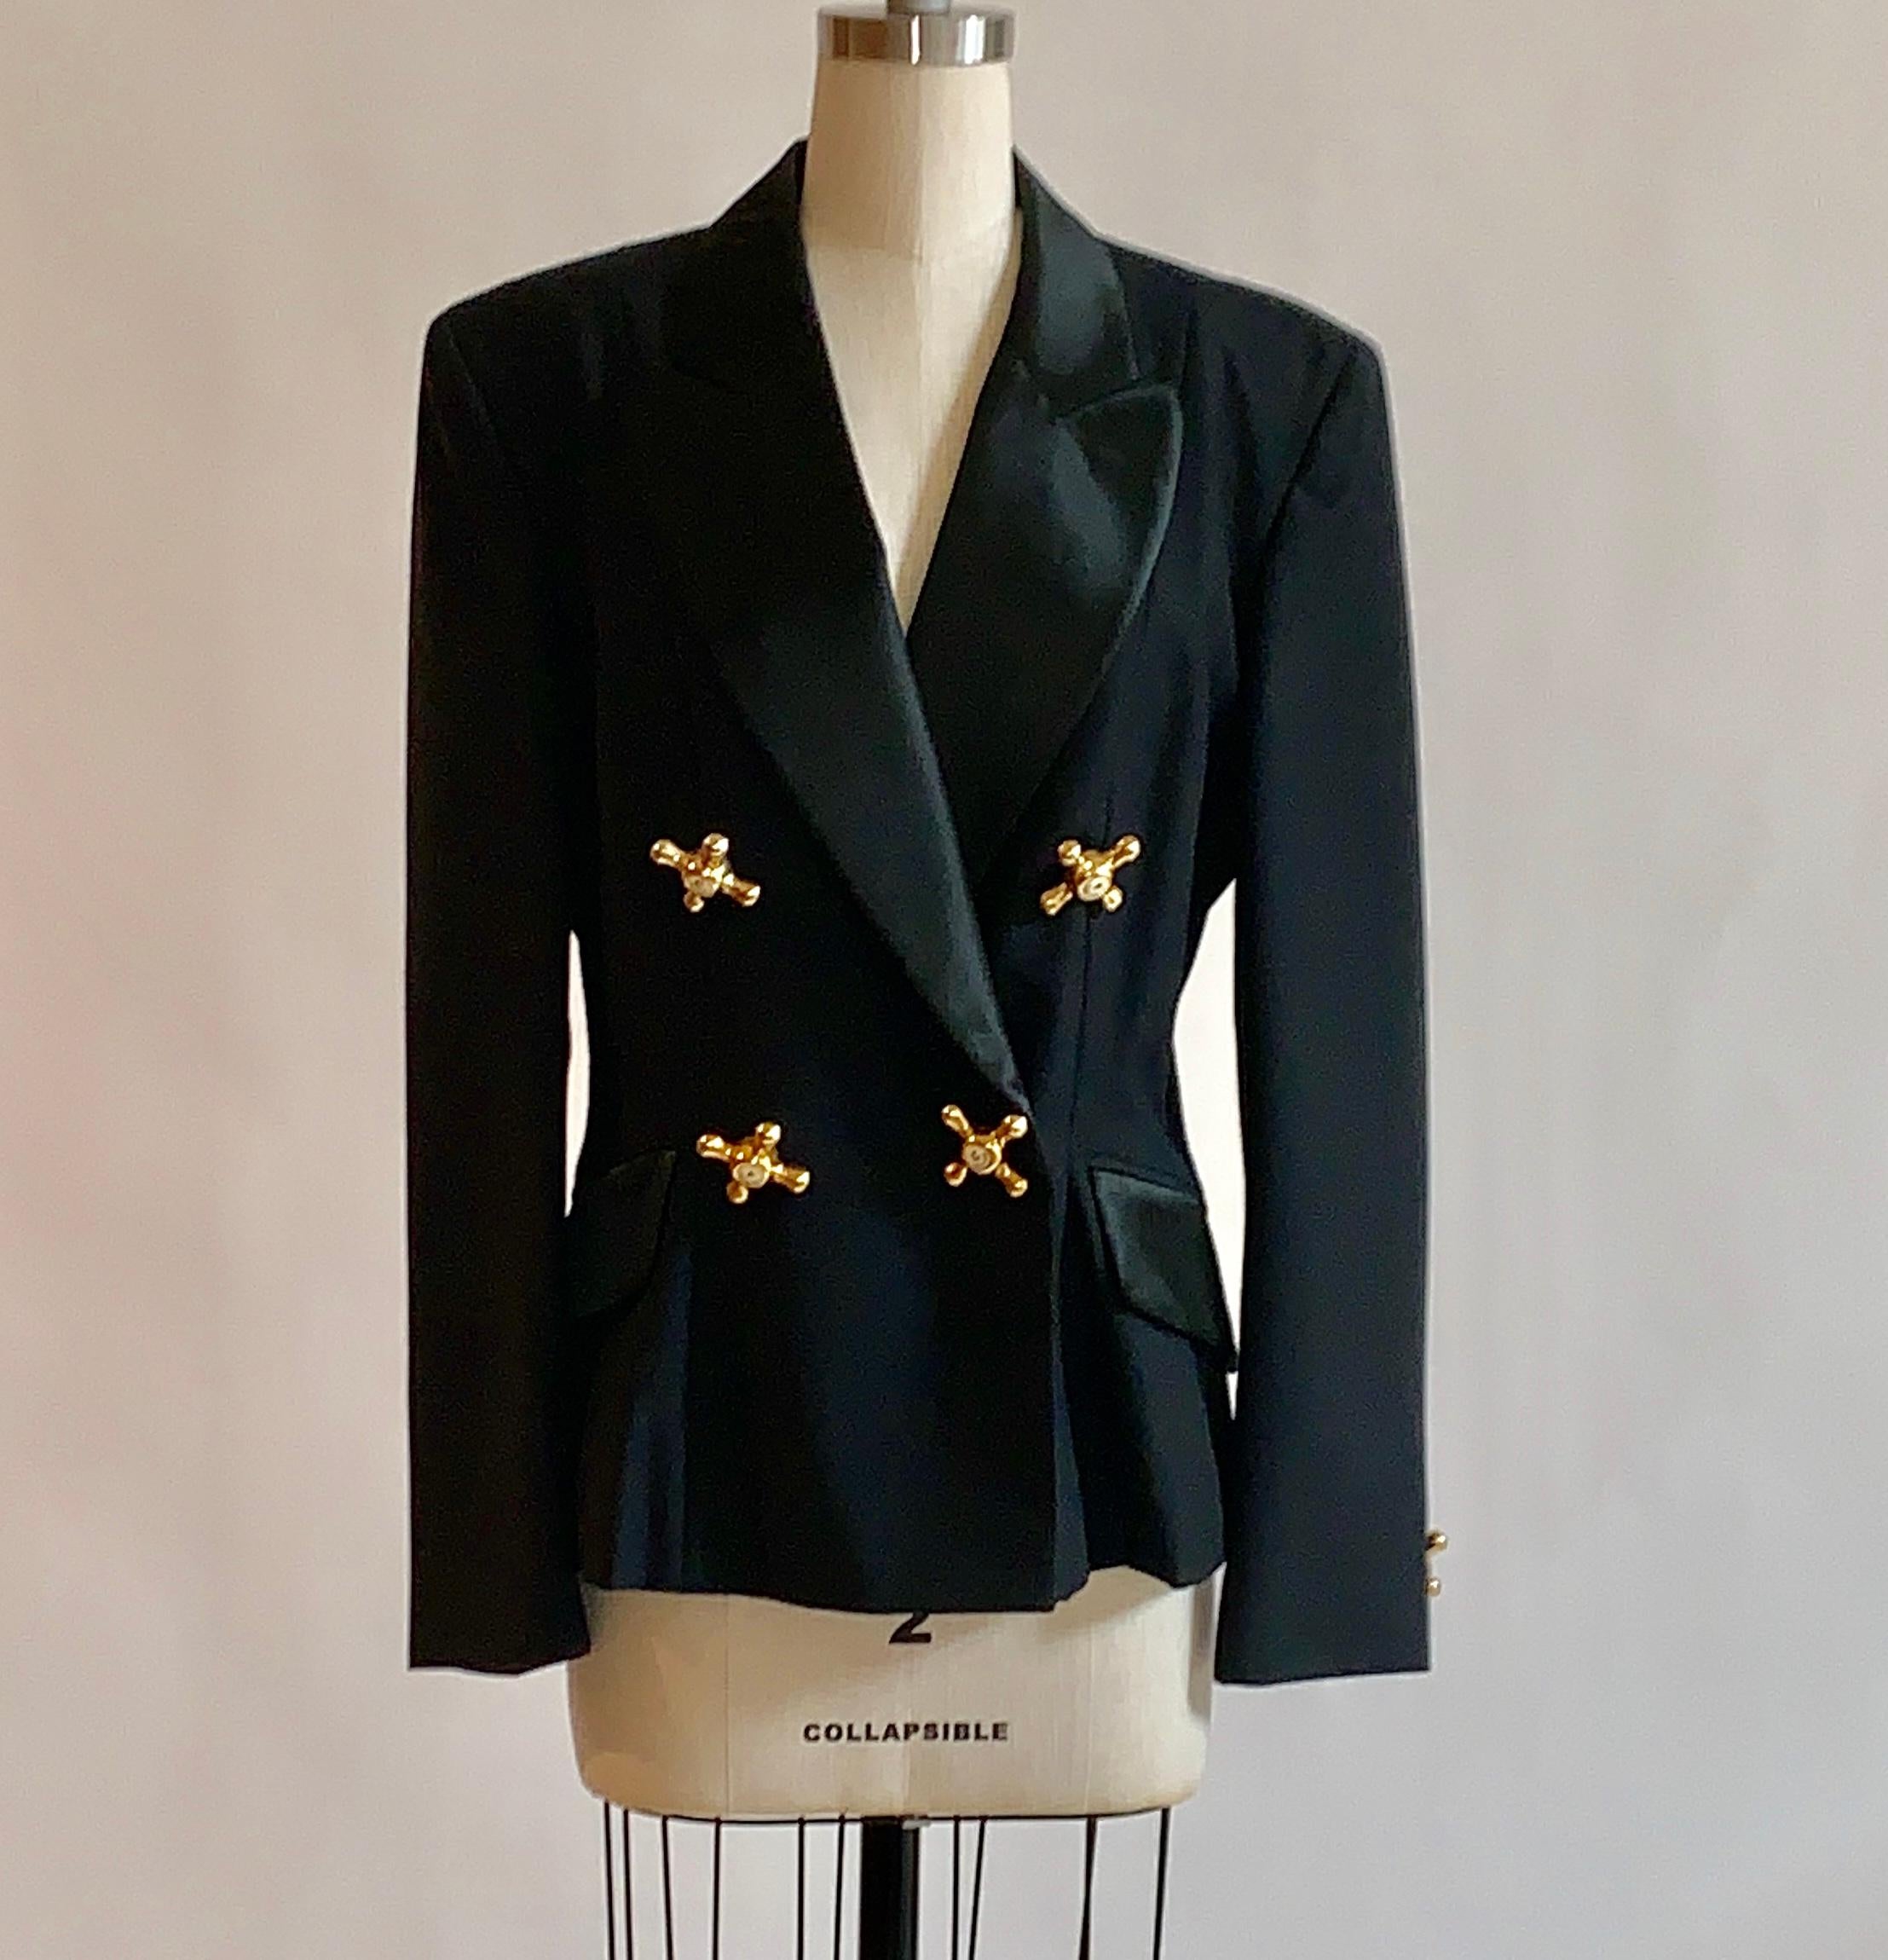 Vintage 1990s Moschino Cheap & Chic black tuxedo style jacket with gold faucets labeled 